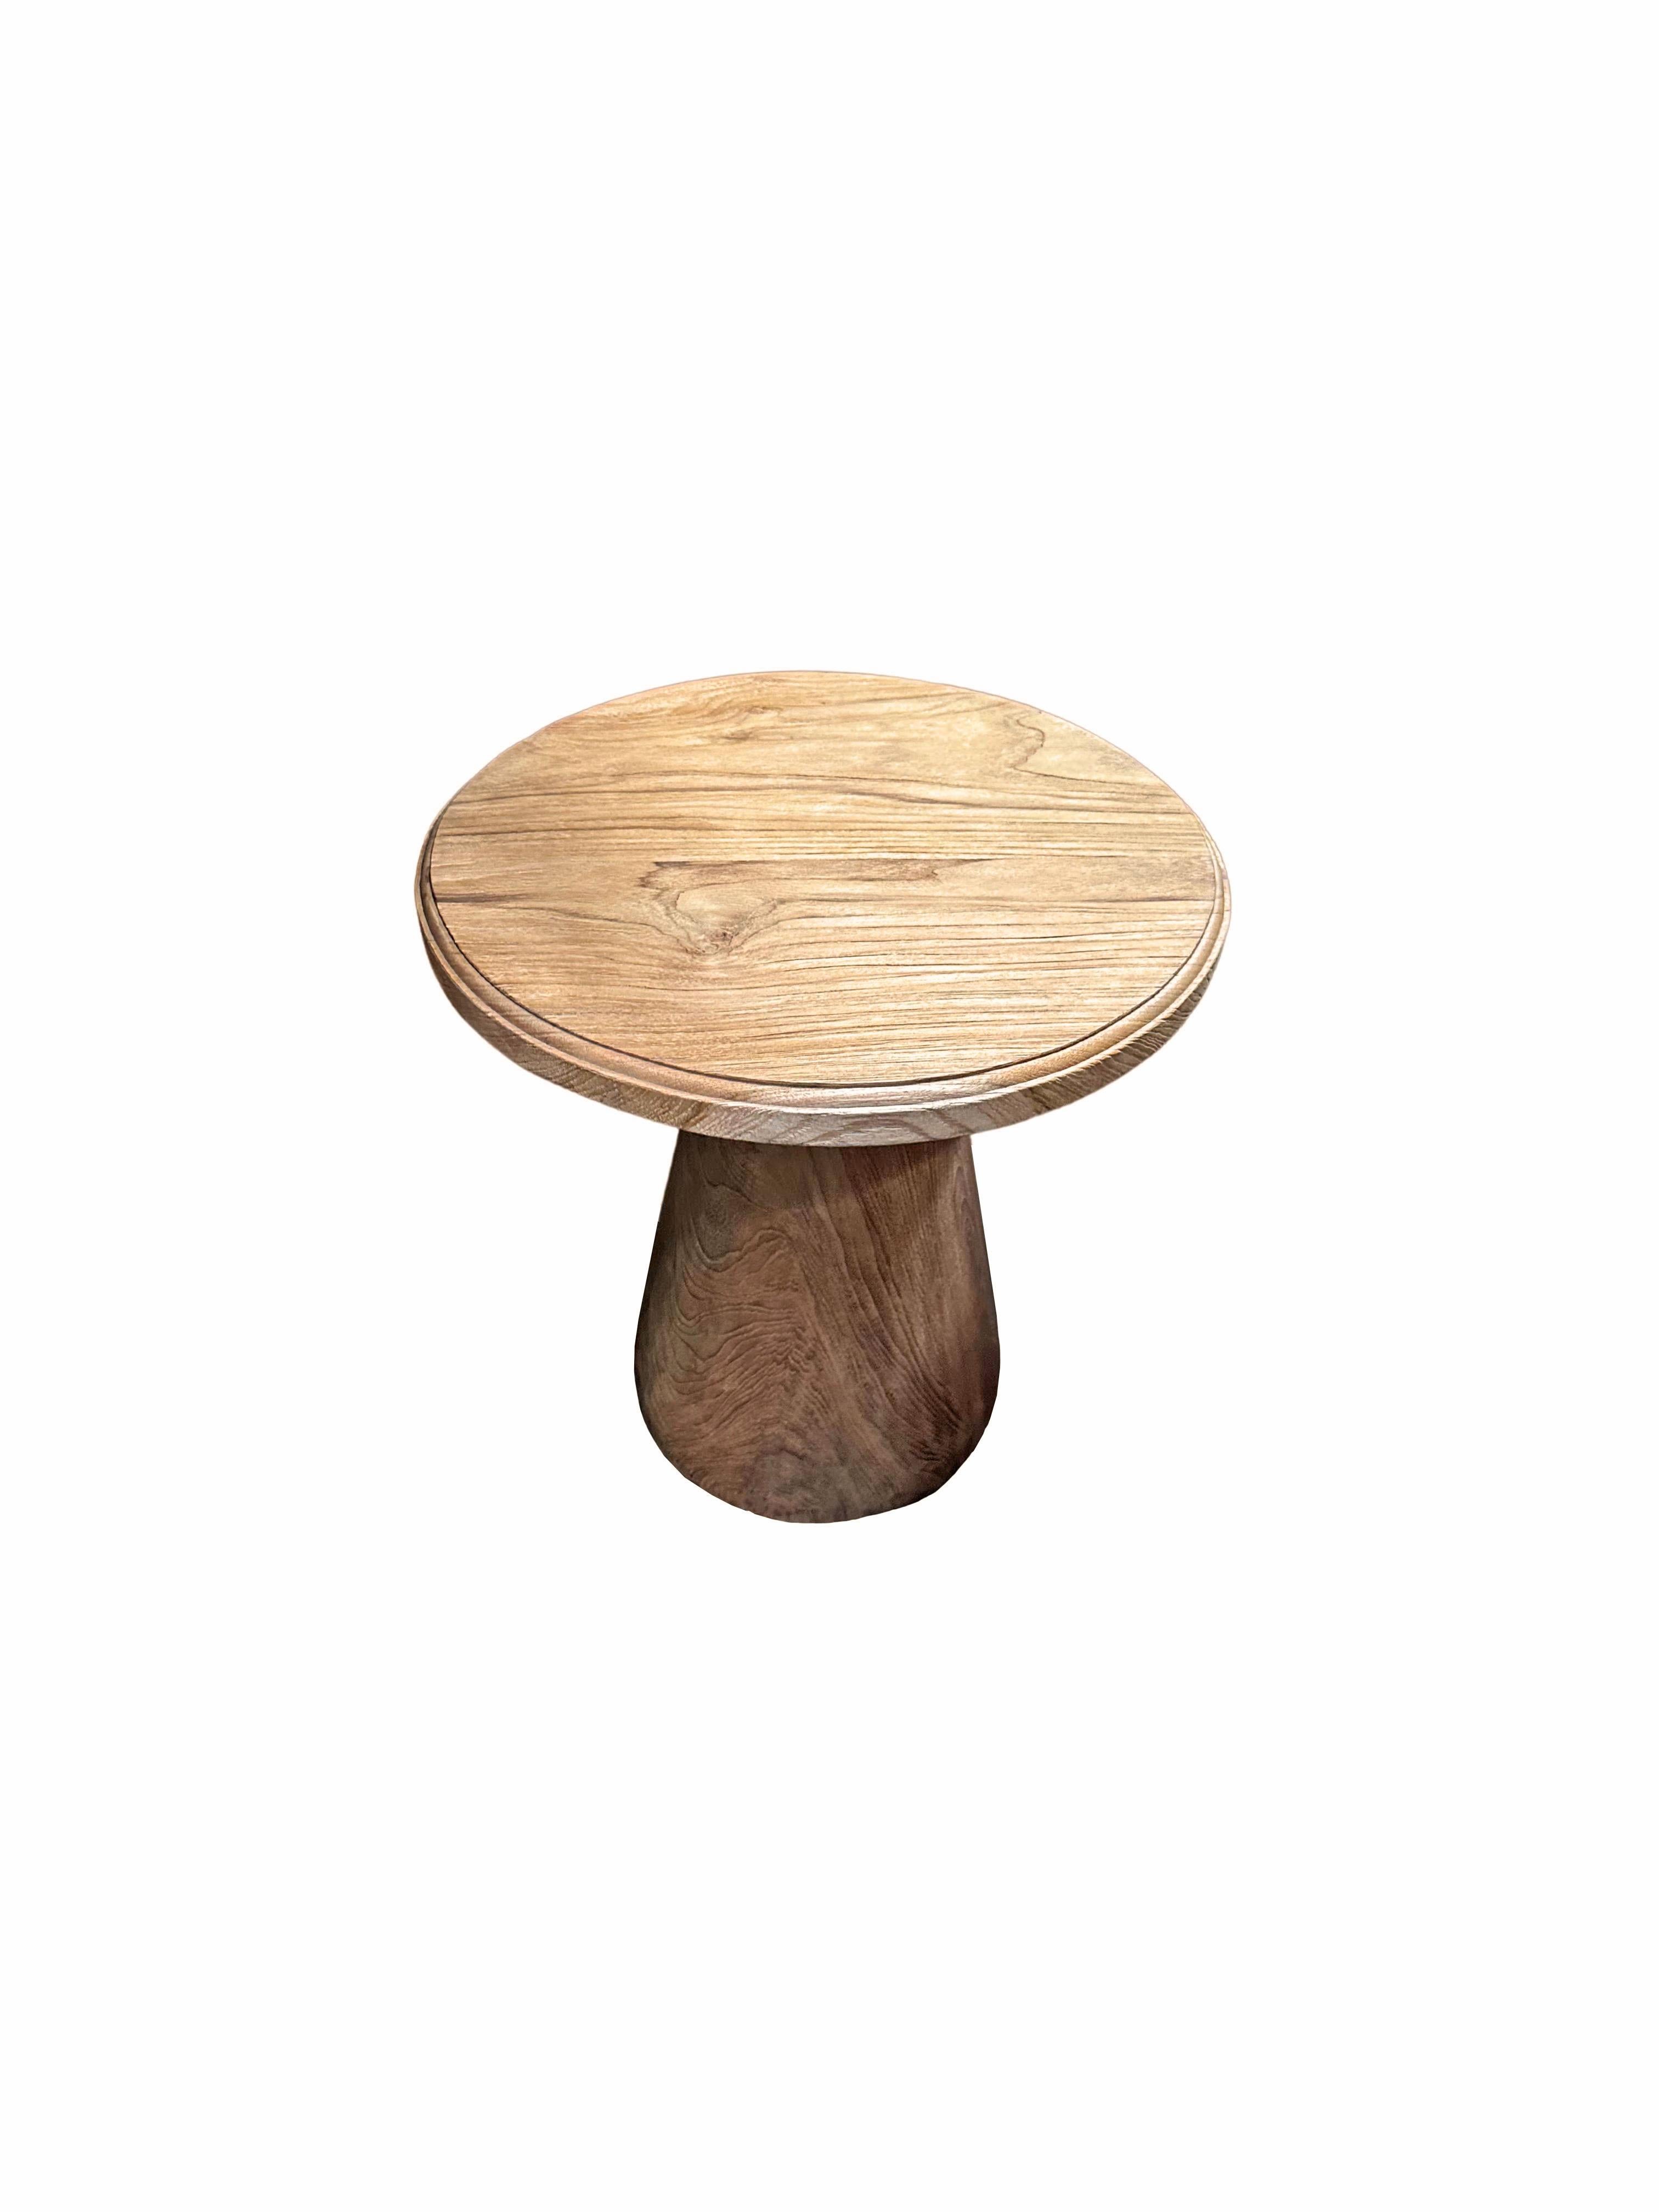 A wonderfully sculptural round side table featuring a natural finish. Its neutral pigment and subtle wood texture makes it perfect for any space. This table was crafted from teak wood and has a smooth texture. 

 